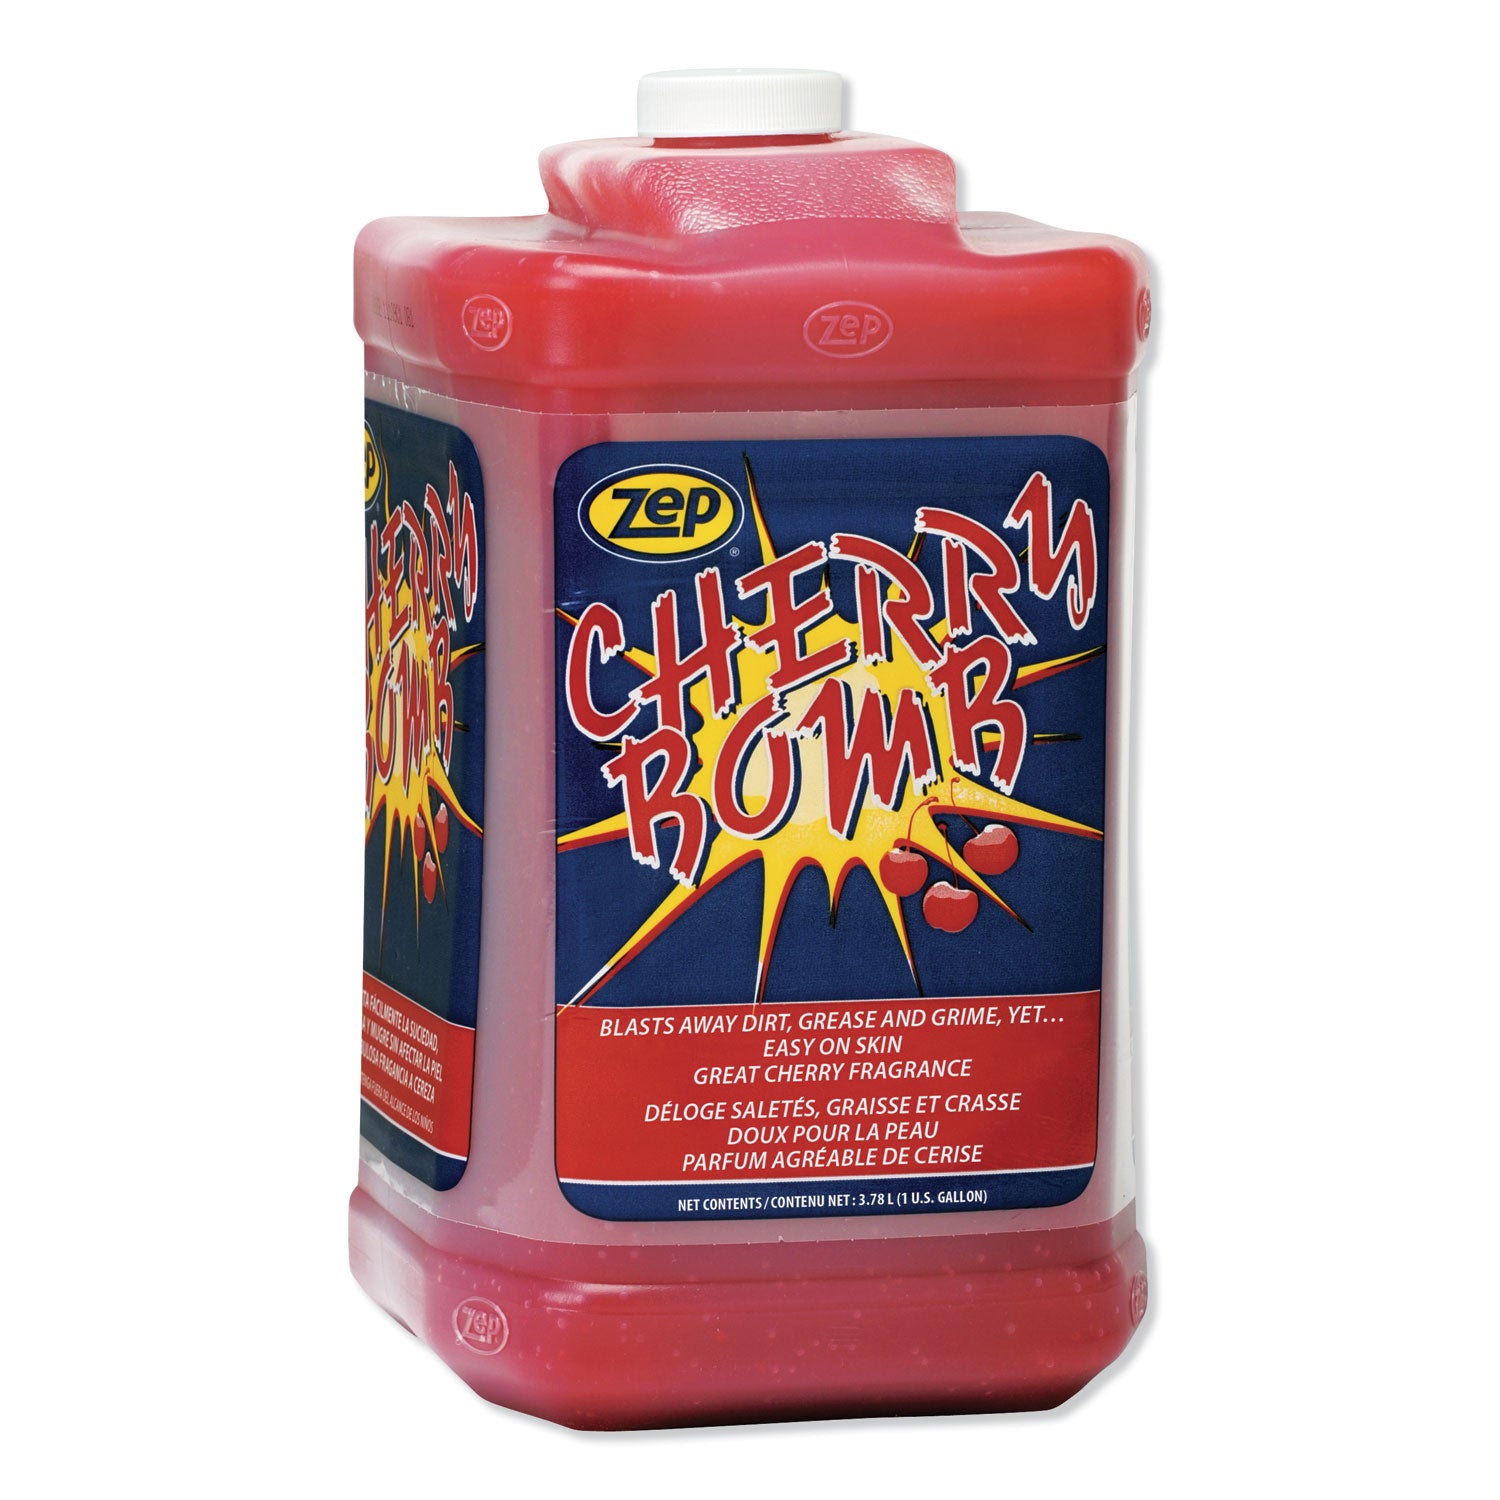 cherry-bomb-hand-cleaner-cherry-scent-1-gal-bottle_zpe95124ea - 1